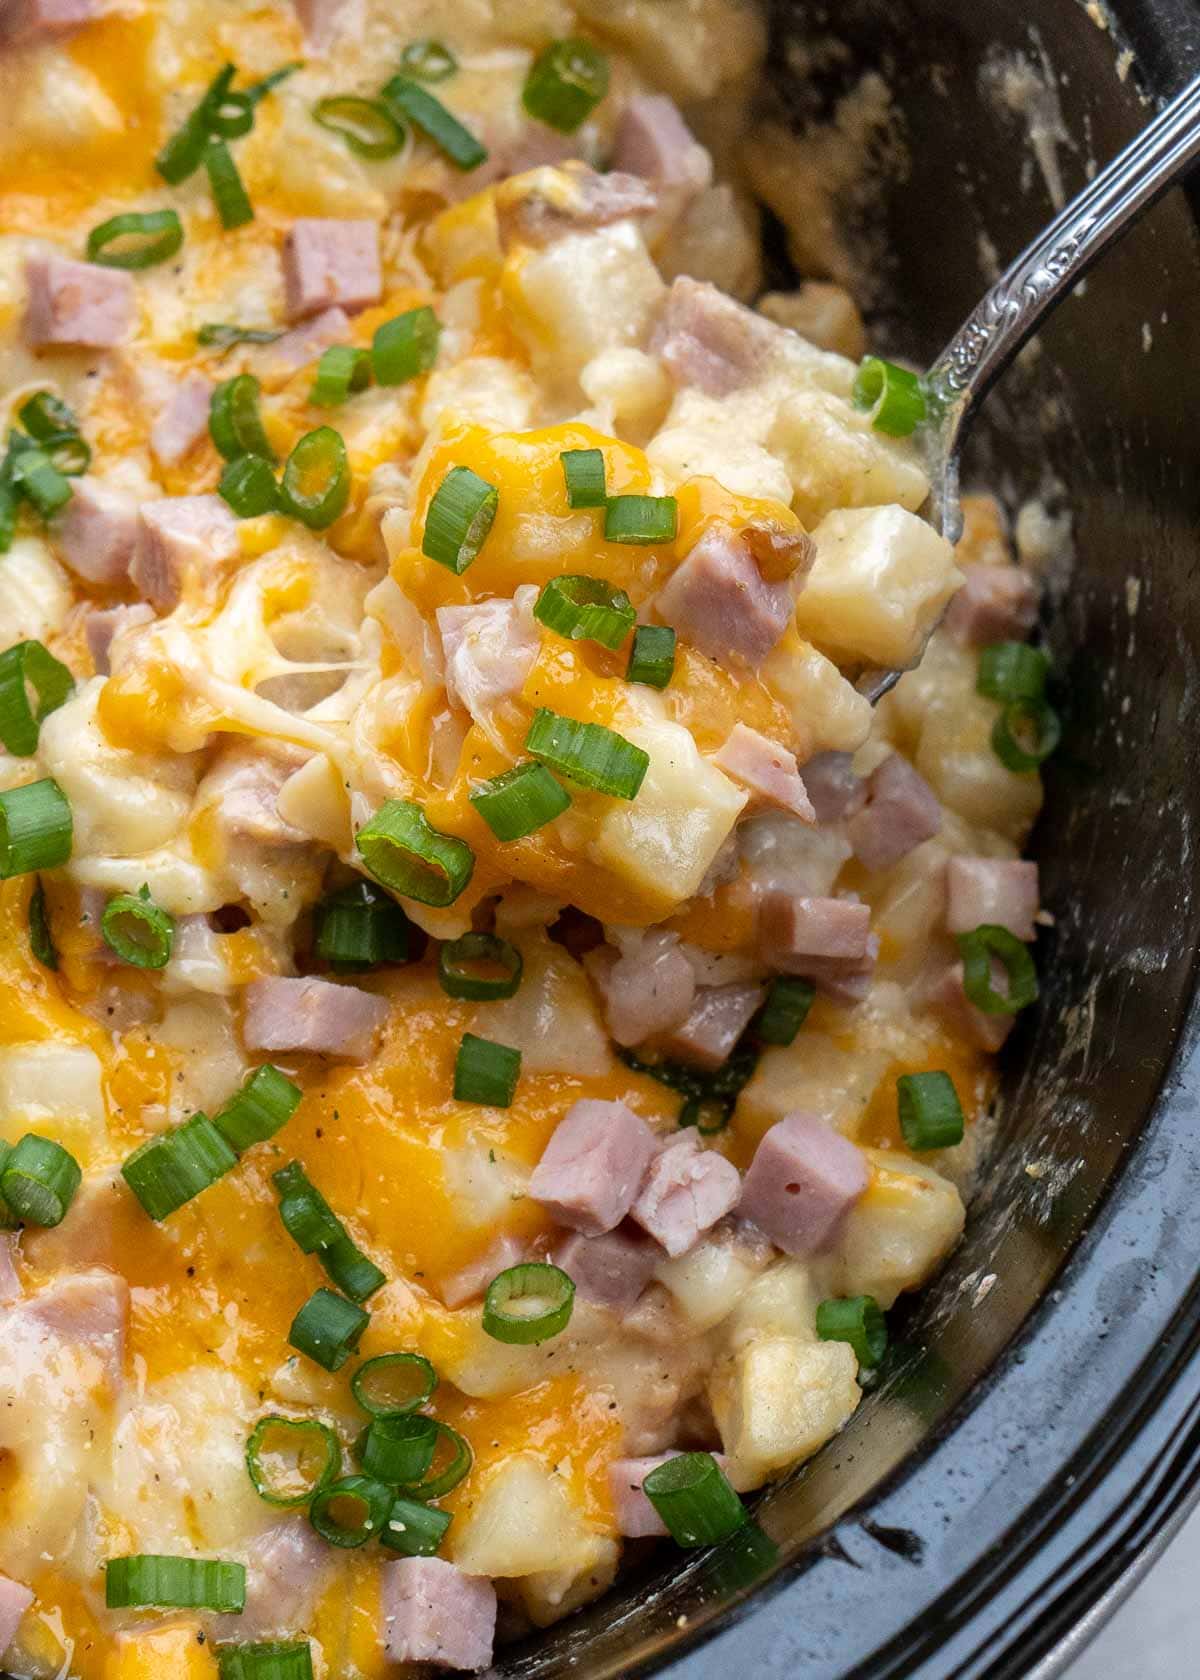 Cheesy Hashbrown Casserole is the perfect comfort food! Frozen hashbrowns are paired with sour cream, cheddar cheese, and ham to make the ultimate side dish! This simple potato recipe requires no prep work and can be made in the crock pot or oven!